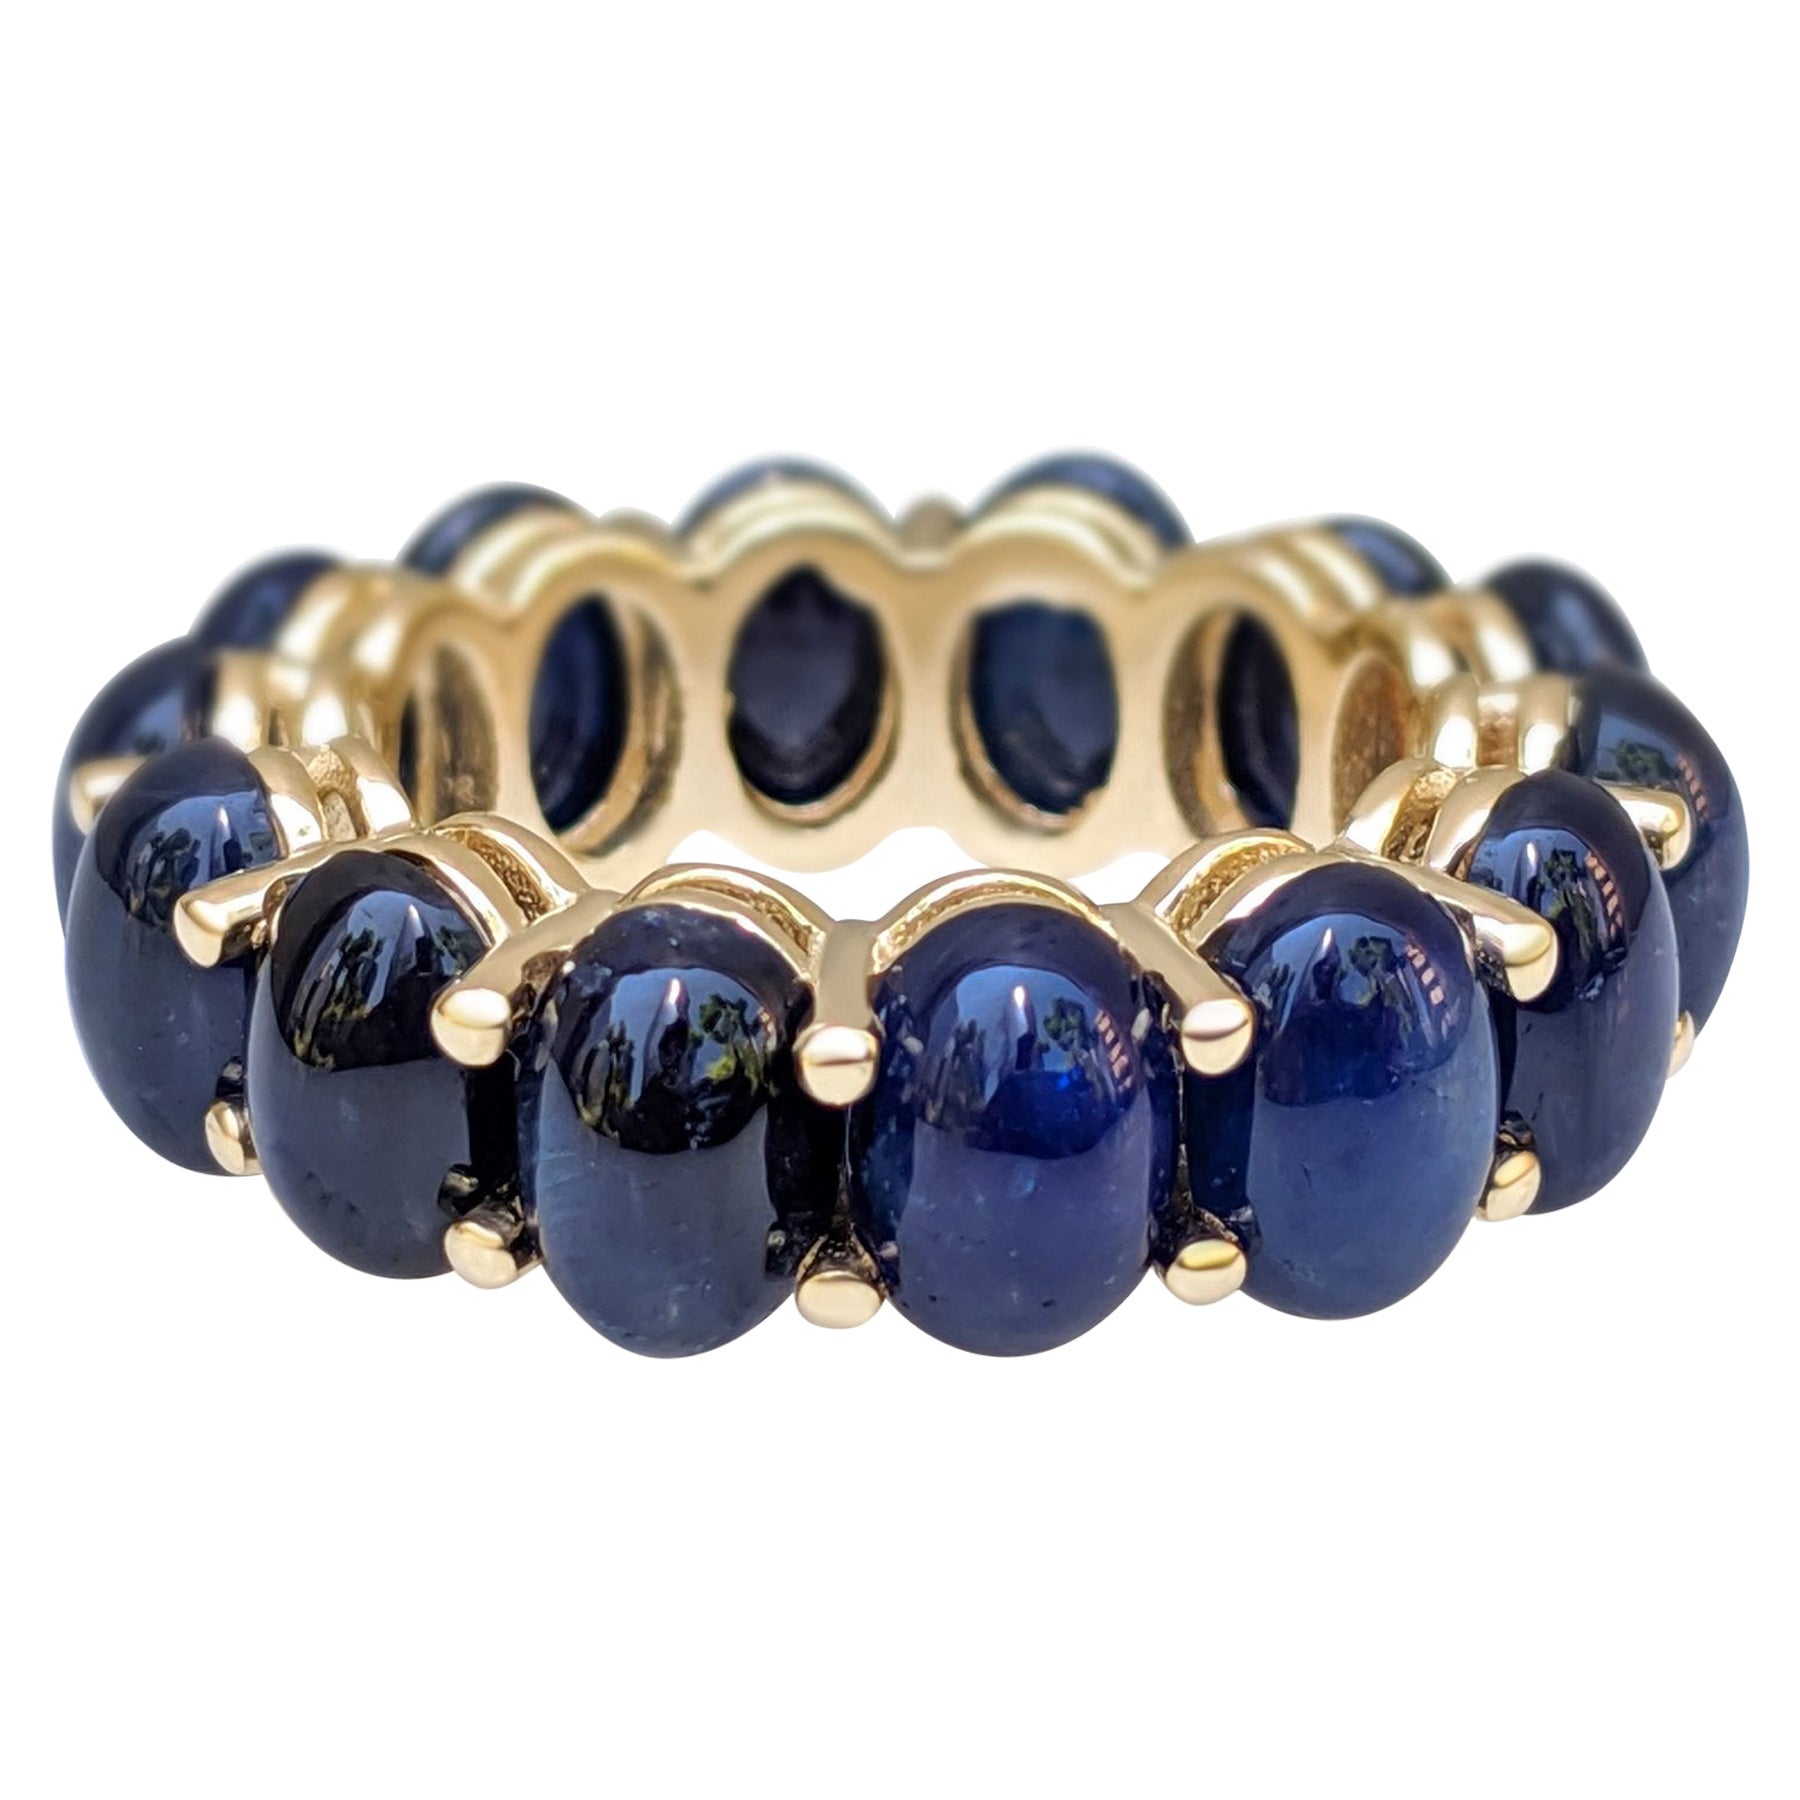 NO RESERVE! 13.07 Carat Sapphire Eternity Band - 14 kt. Yellow Gold - Ring